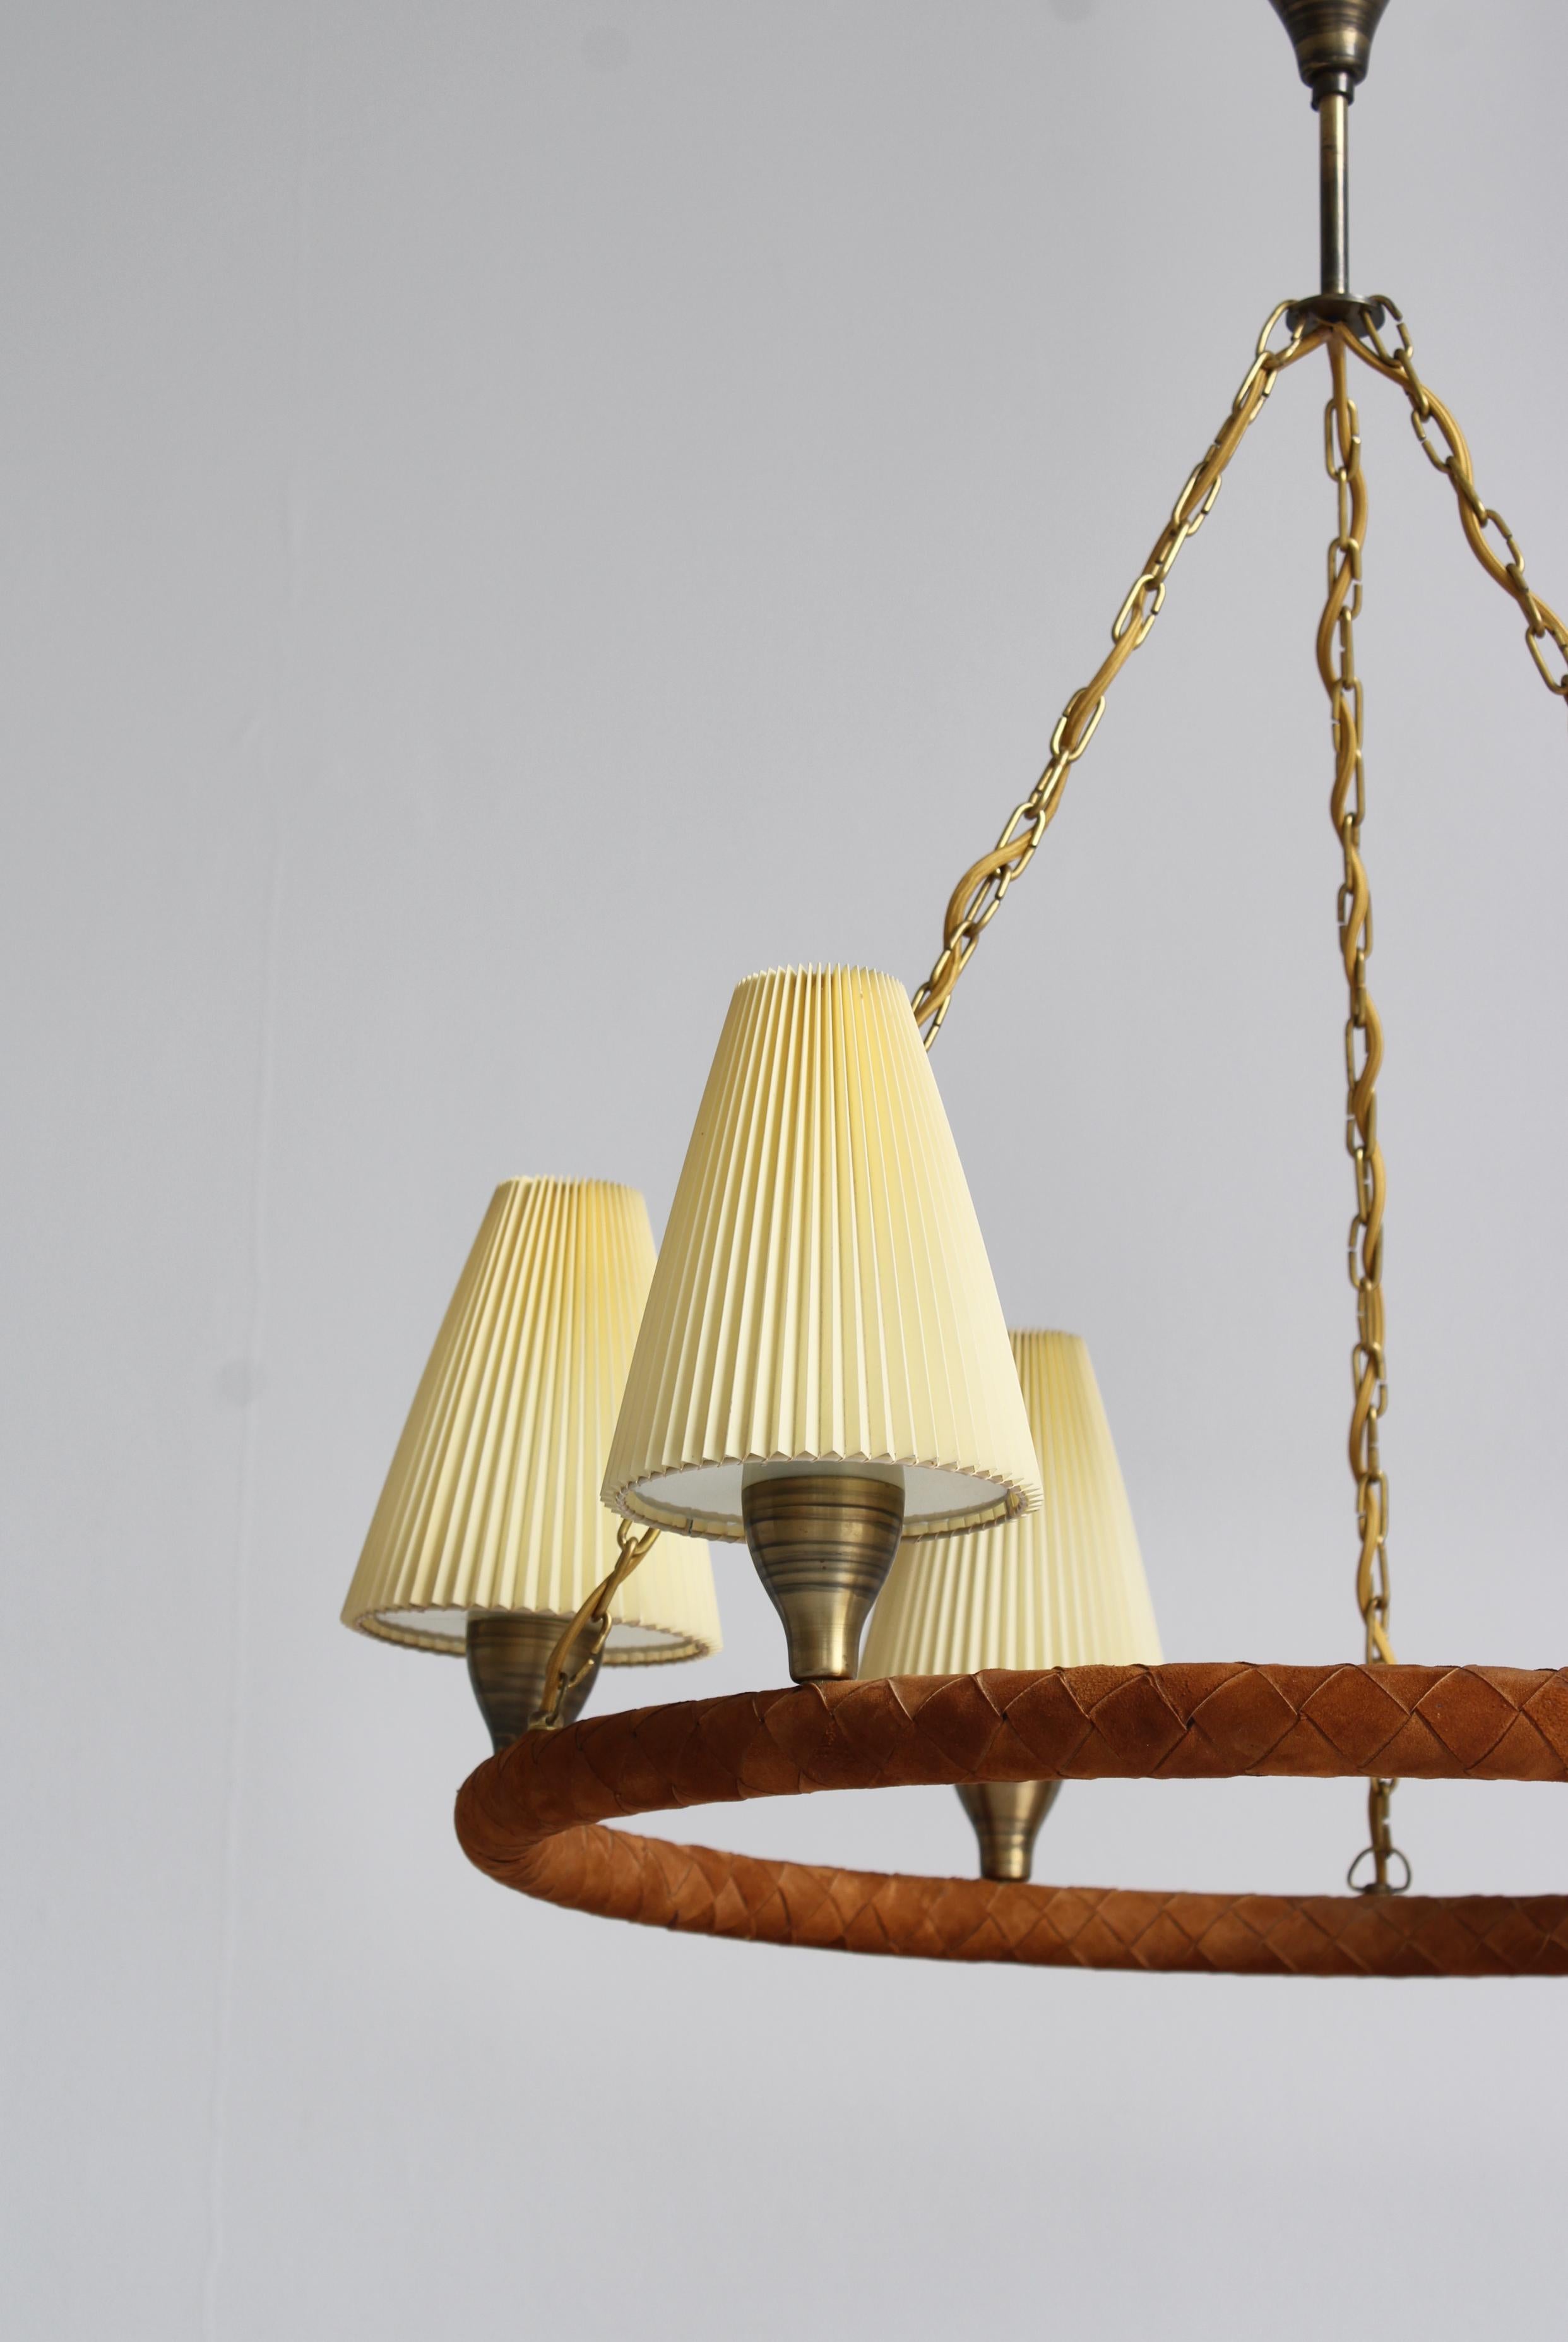 Danish Modern Chandelier in Leather, Brass and Glass by LYFA, Denmark, 1940s For Sale 5